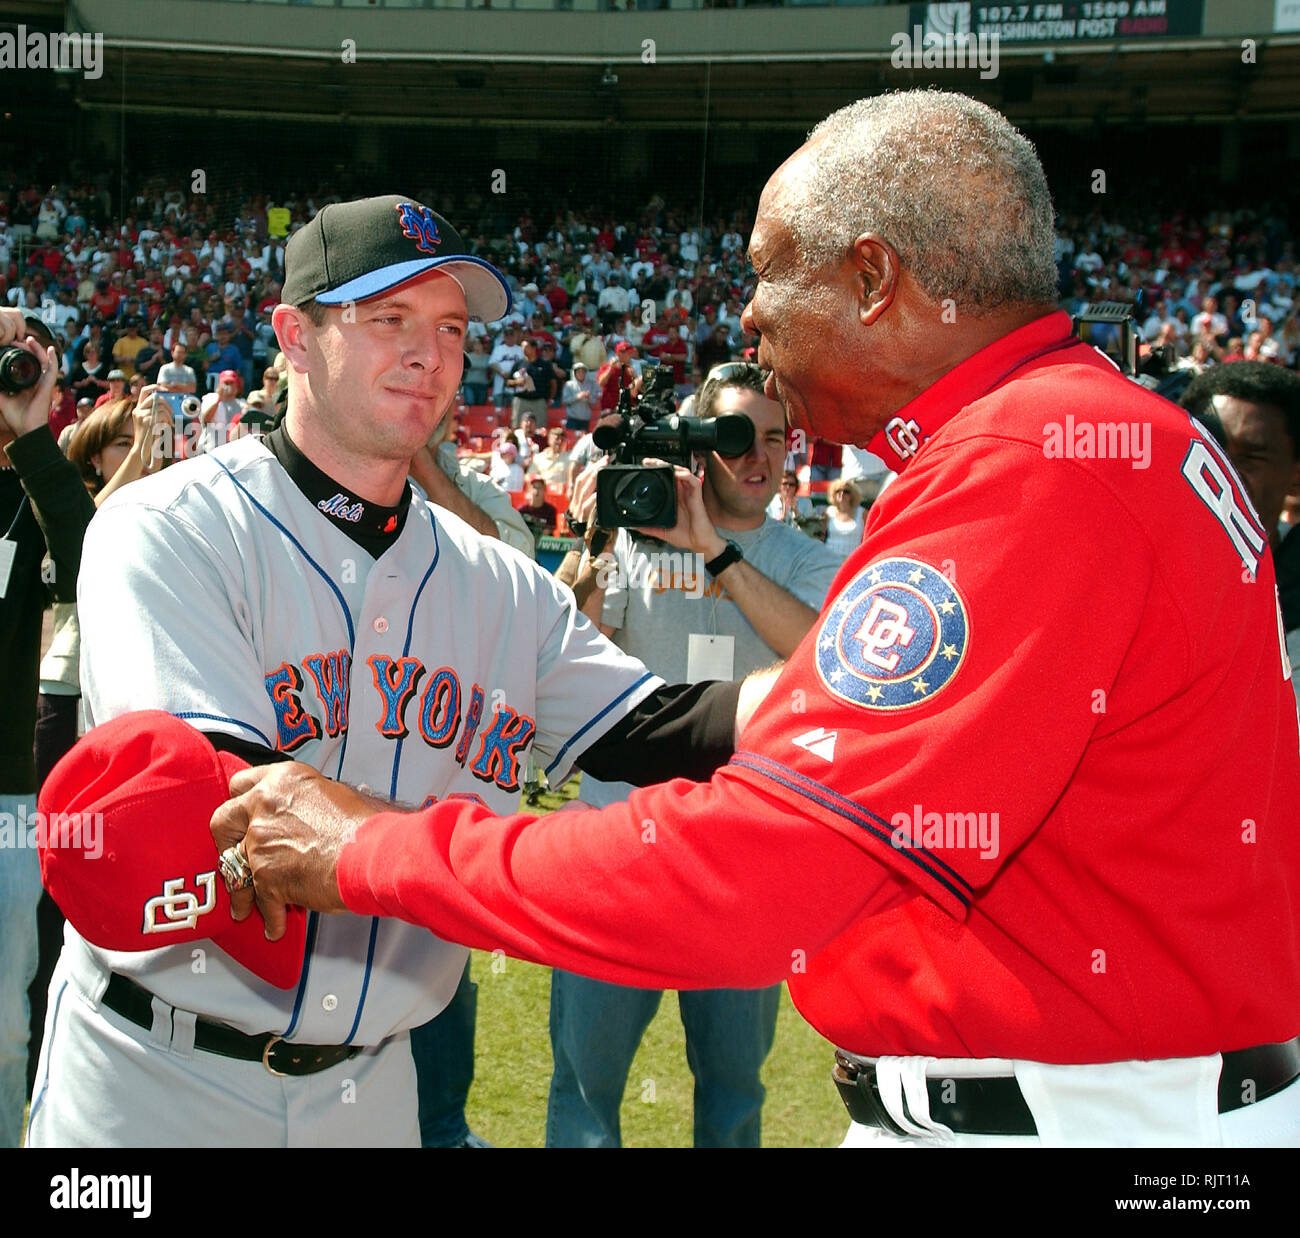 Washington, DC - October 1, 2006 -- New York Mets pitcher Billy Wagner shakes hands with Washington Nationals manager Frank Robinson prior to the game at RFK Stadium in Washington, DC on October 1, 2006. It will be Robinson's last game as Nationals' manager. Credit: Ron Sachs/CNP [RESTRICTION: No New York Metro or other Newspapers within a 75 mile radius of New York City] | usage worldwide Stock Photo